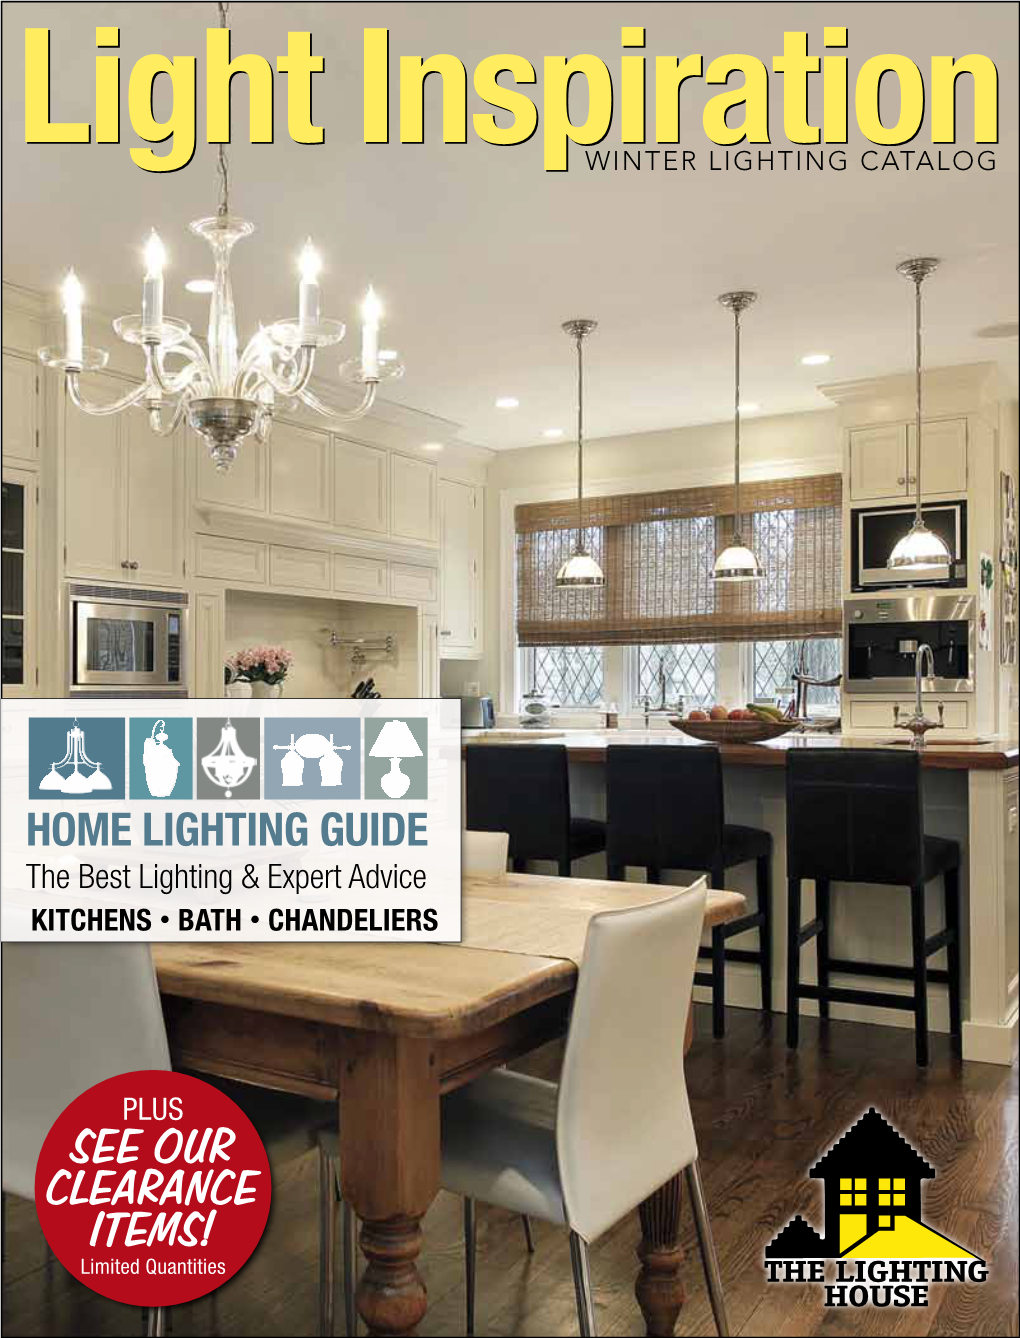 Home Lighting Guide the Best Lighting & Expert Advice Kitchens • Bath • Chandeliers